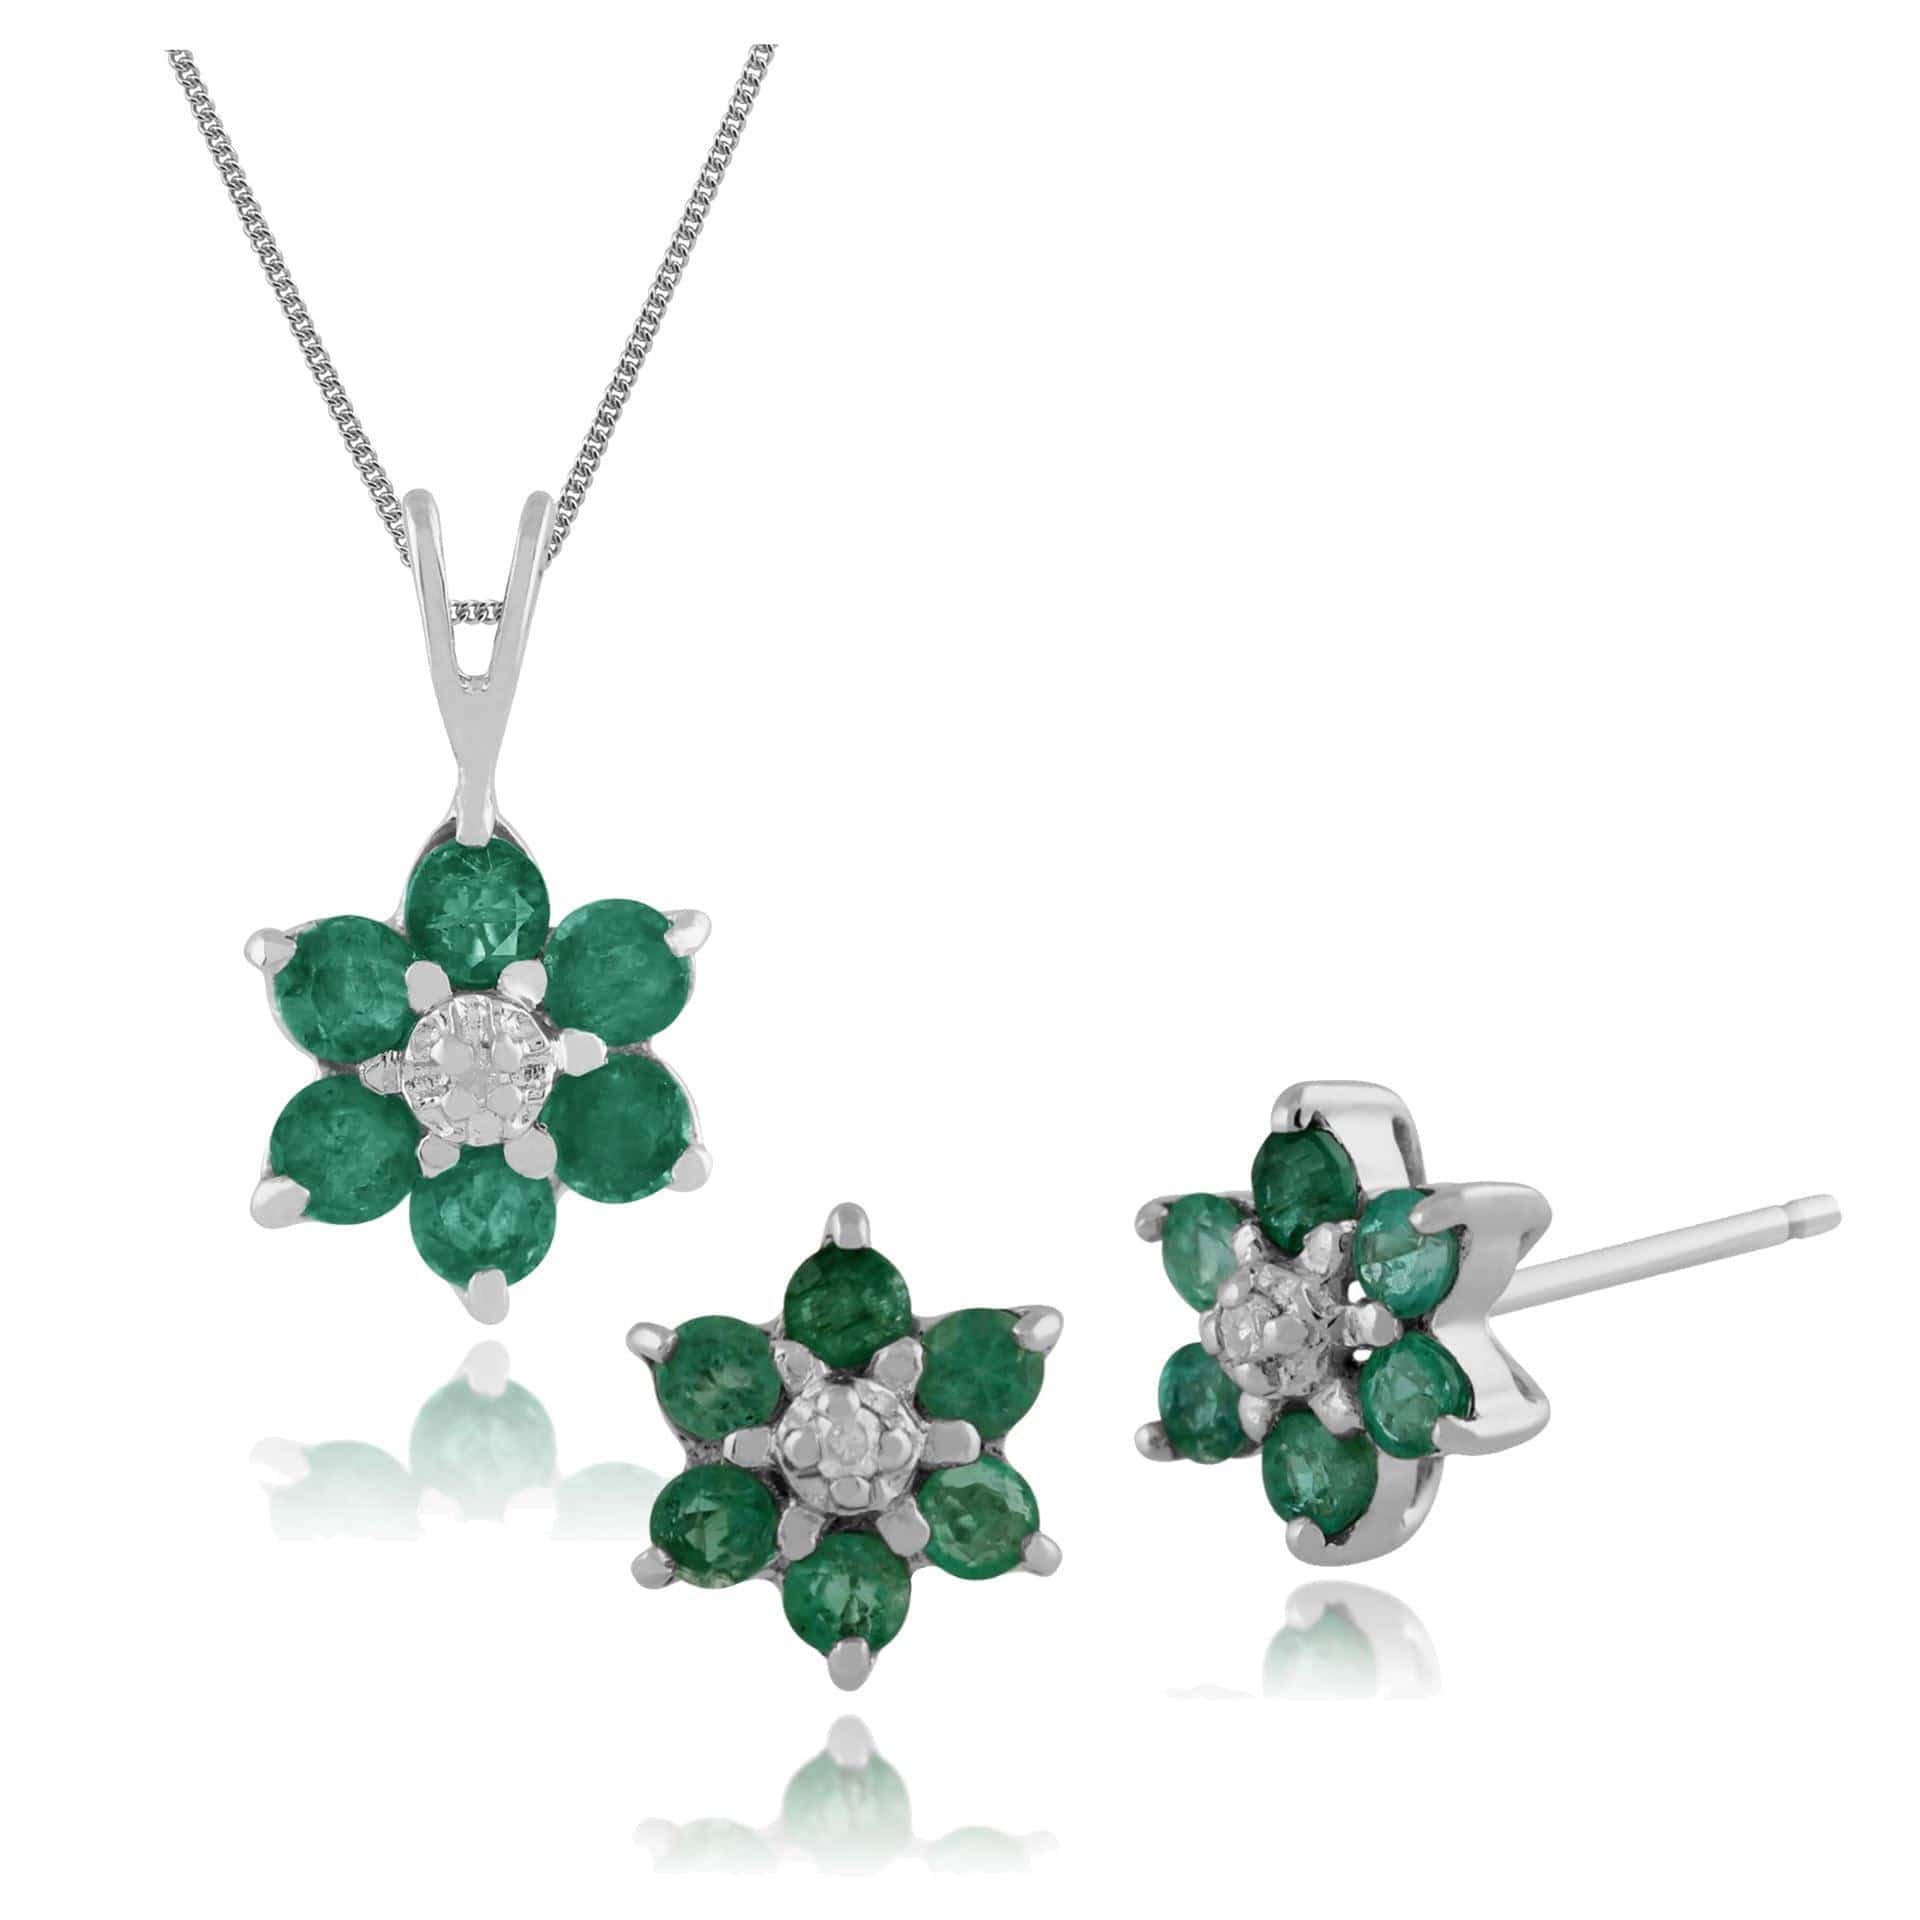 117E0009039-117P0625039 Floral Round Emerald & Diamond Flower Cluster Stud Earrings & Pendant Set in 9ct White Gold 1